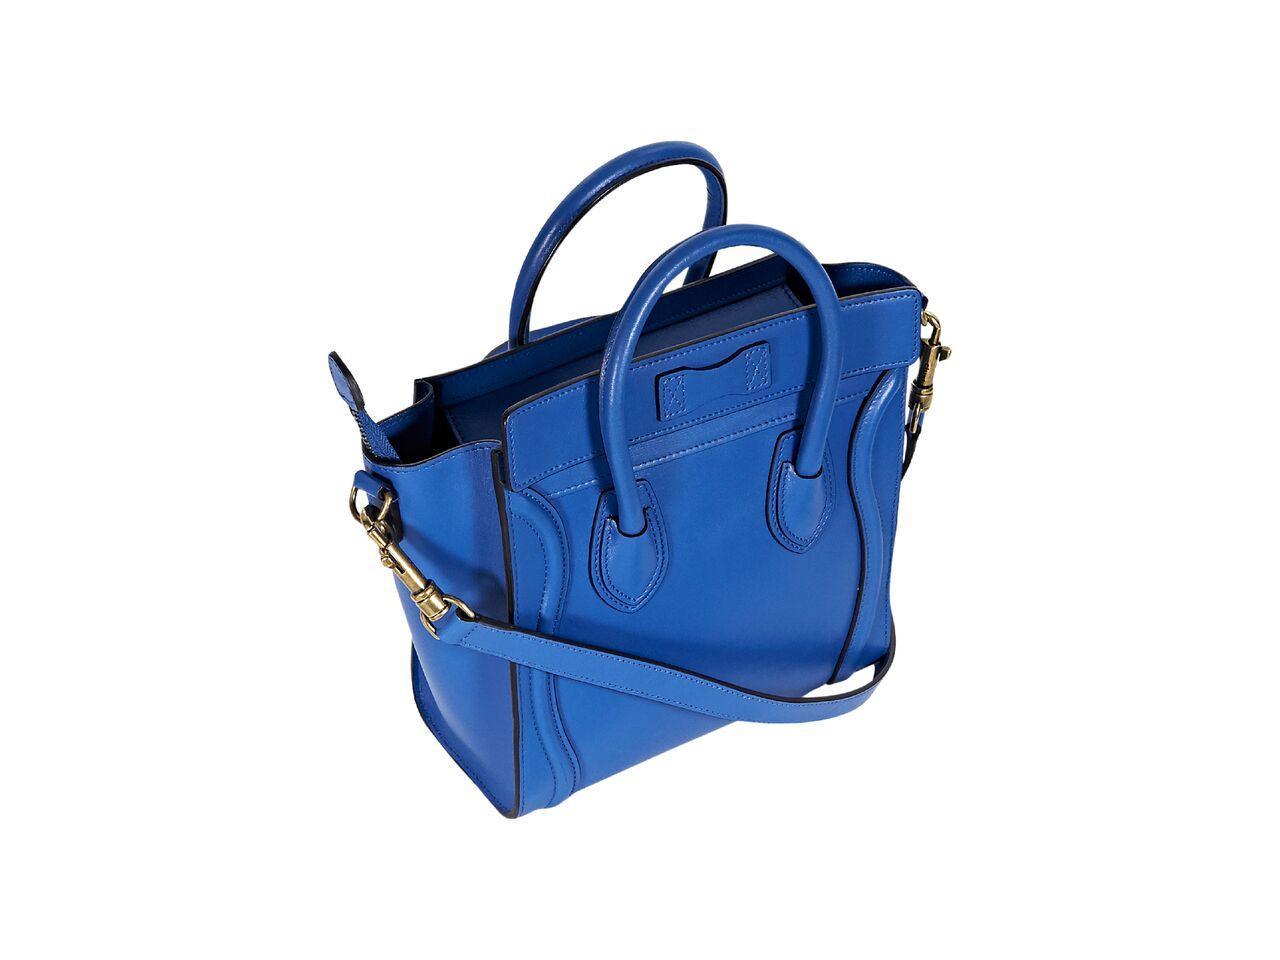 Product details:  Blue leather nano luggage satchel by Celine.  Dual carry handles.  Detachable crossbody strap.  Top zip closure.  Leather lined interior with inner slide pocket.  Front exterior zip pocket.  Goldtone hardware.  
Condition: